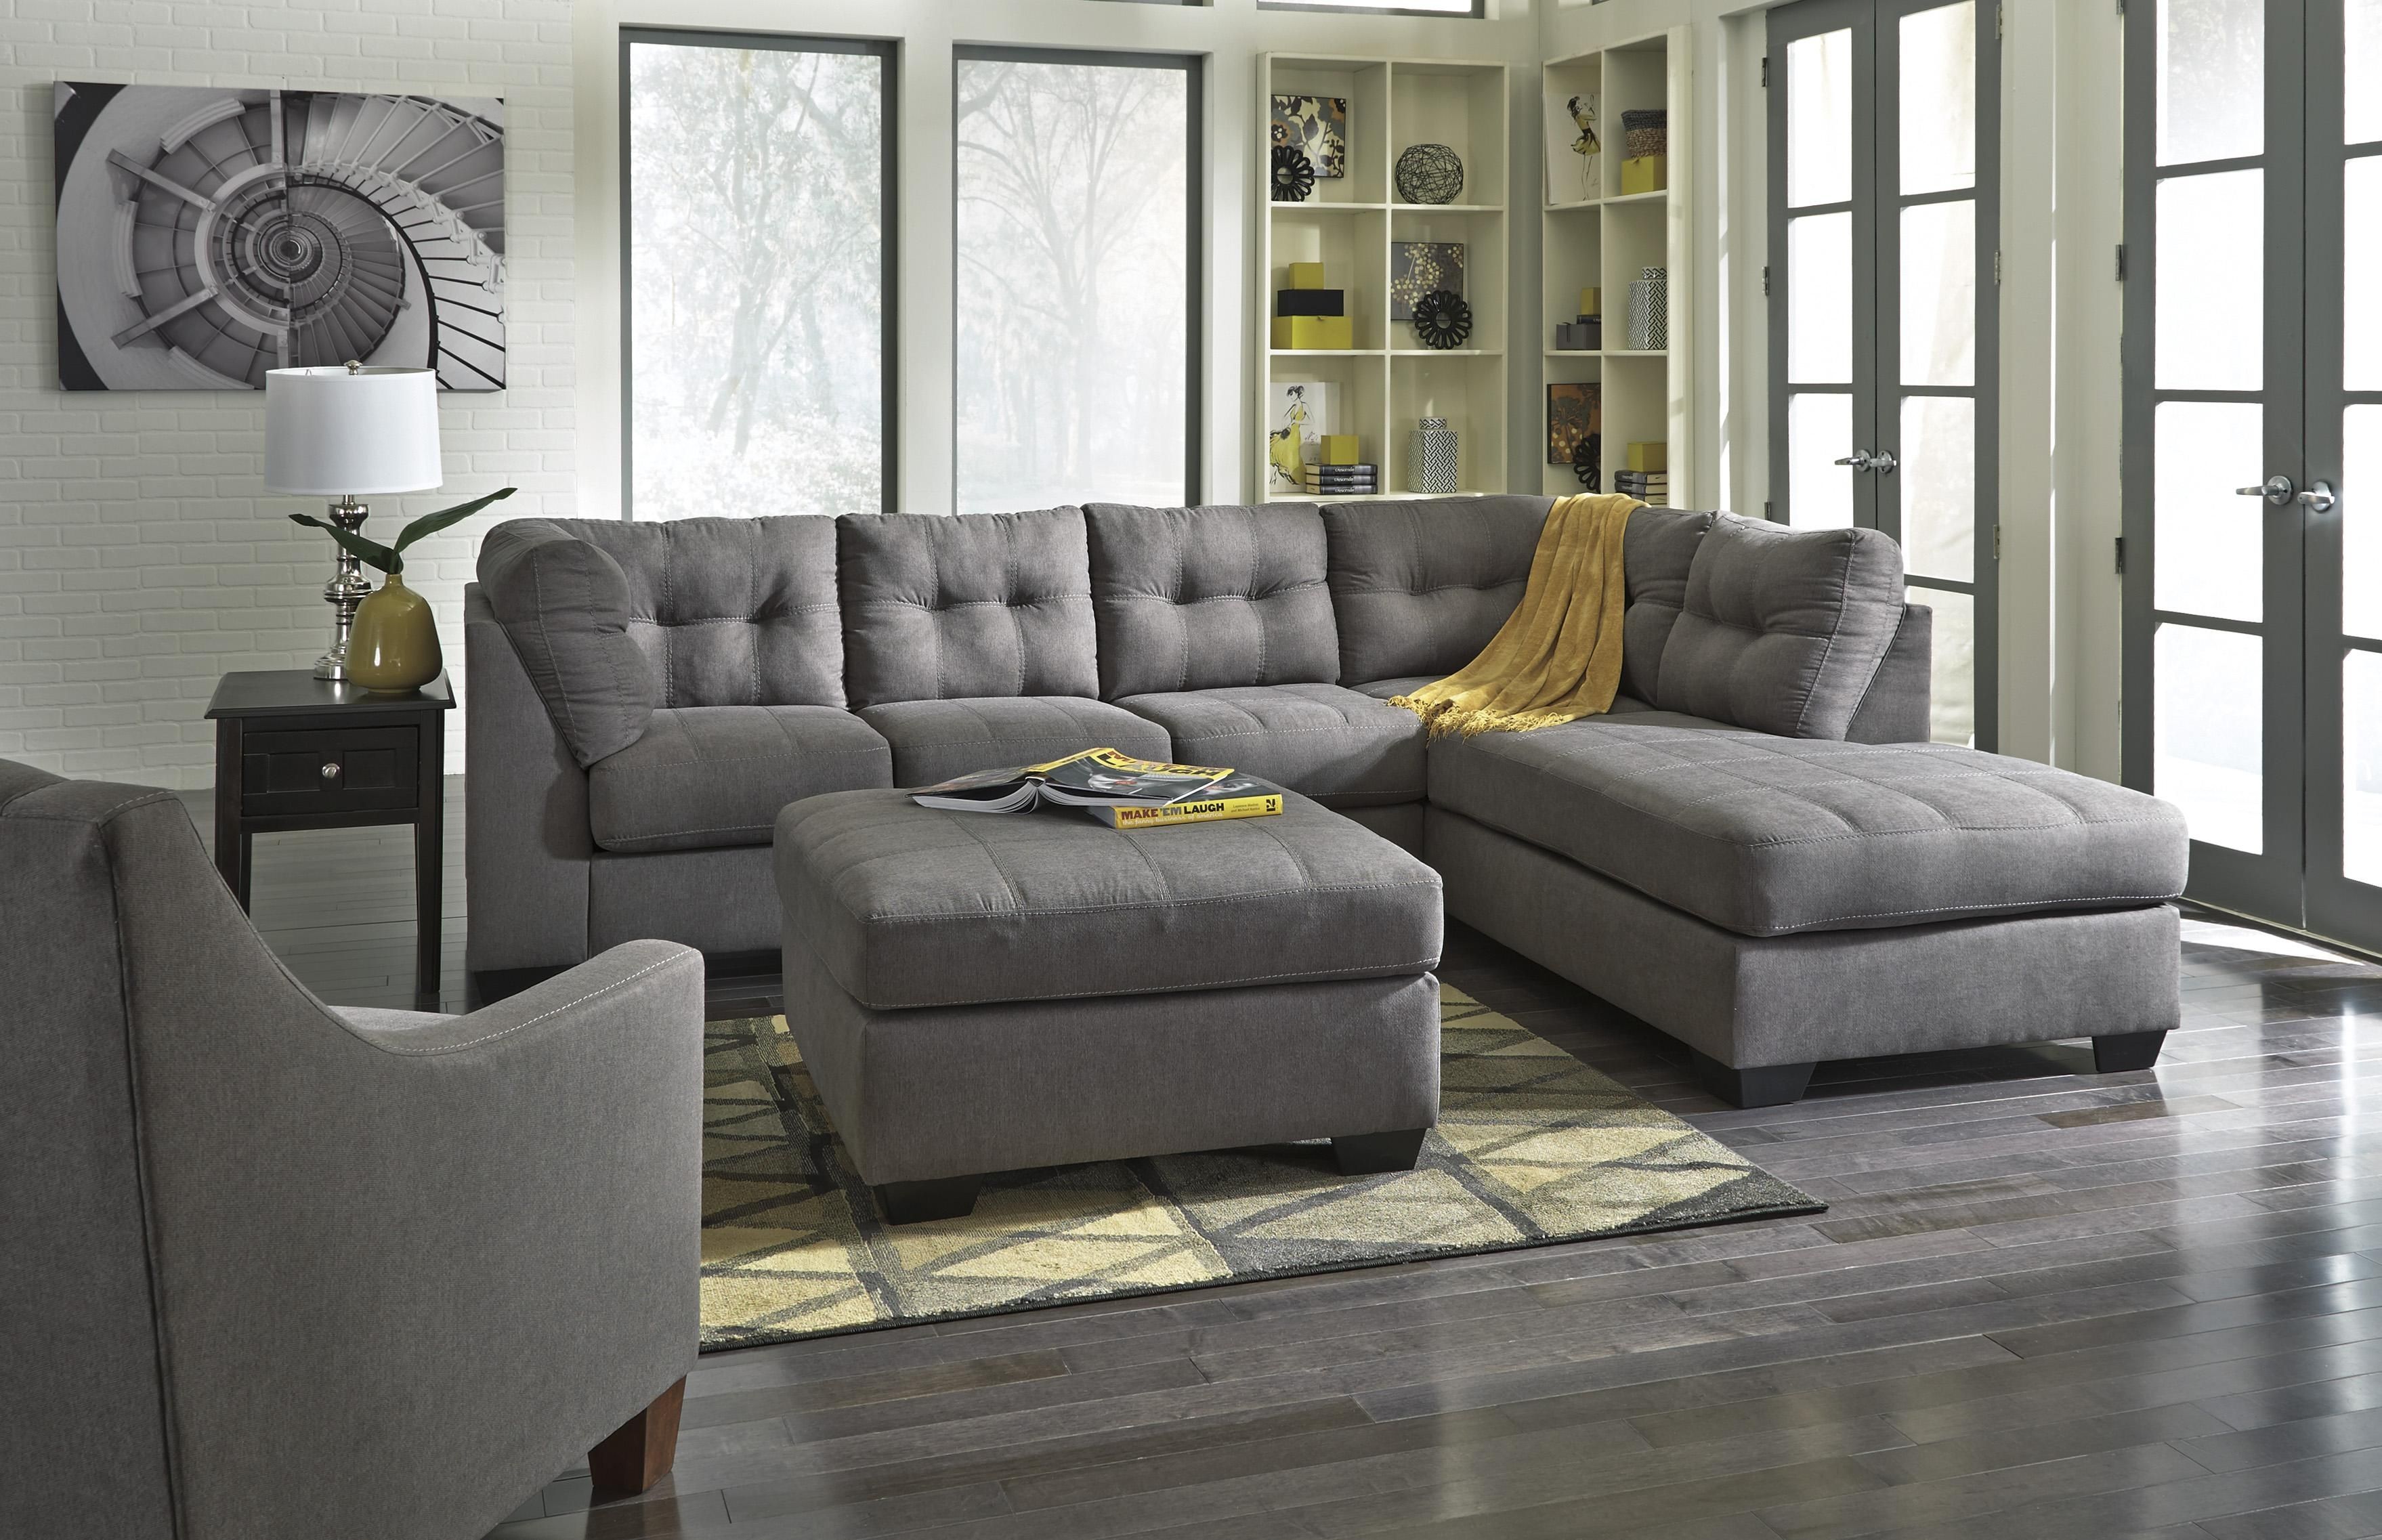 Benchcraft Maier – Charcoal 2 Piece Sectional W/ Sleeper Sofa Within Sectional Sleeper Sofas With Ottoman (View 8 of 10)